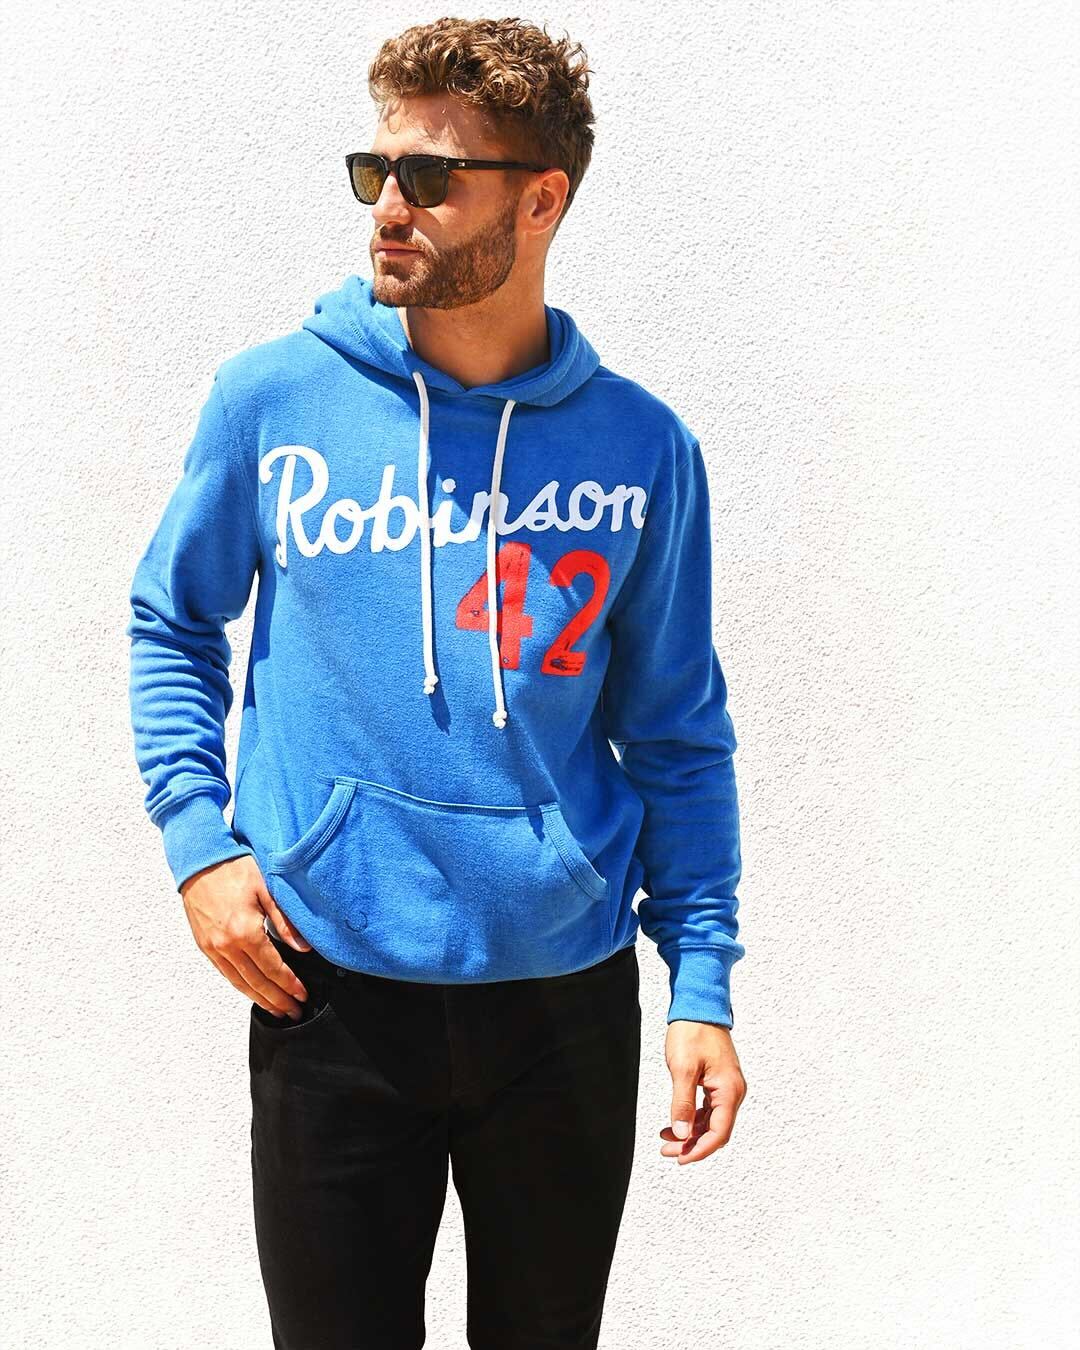 Jackie Robinson #42 Essential Blue Hoody - Roots of Fight Canada